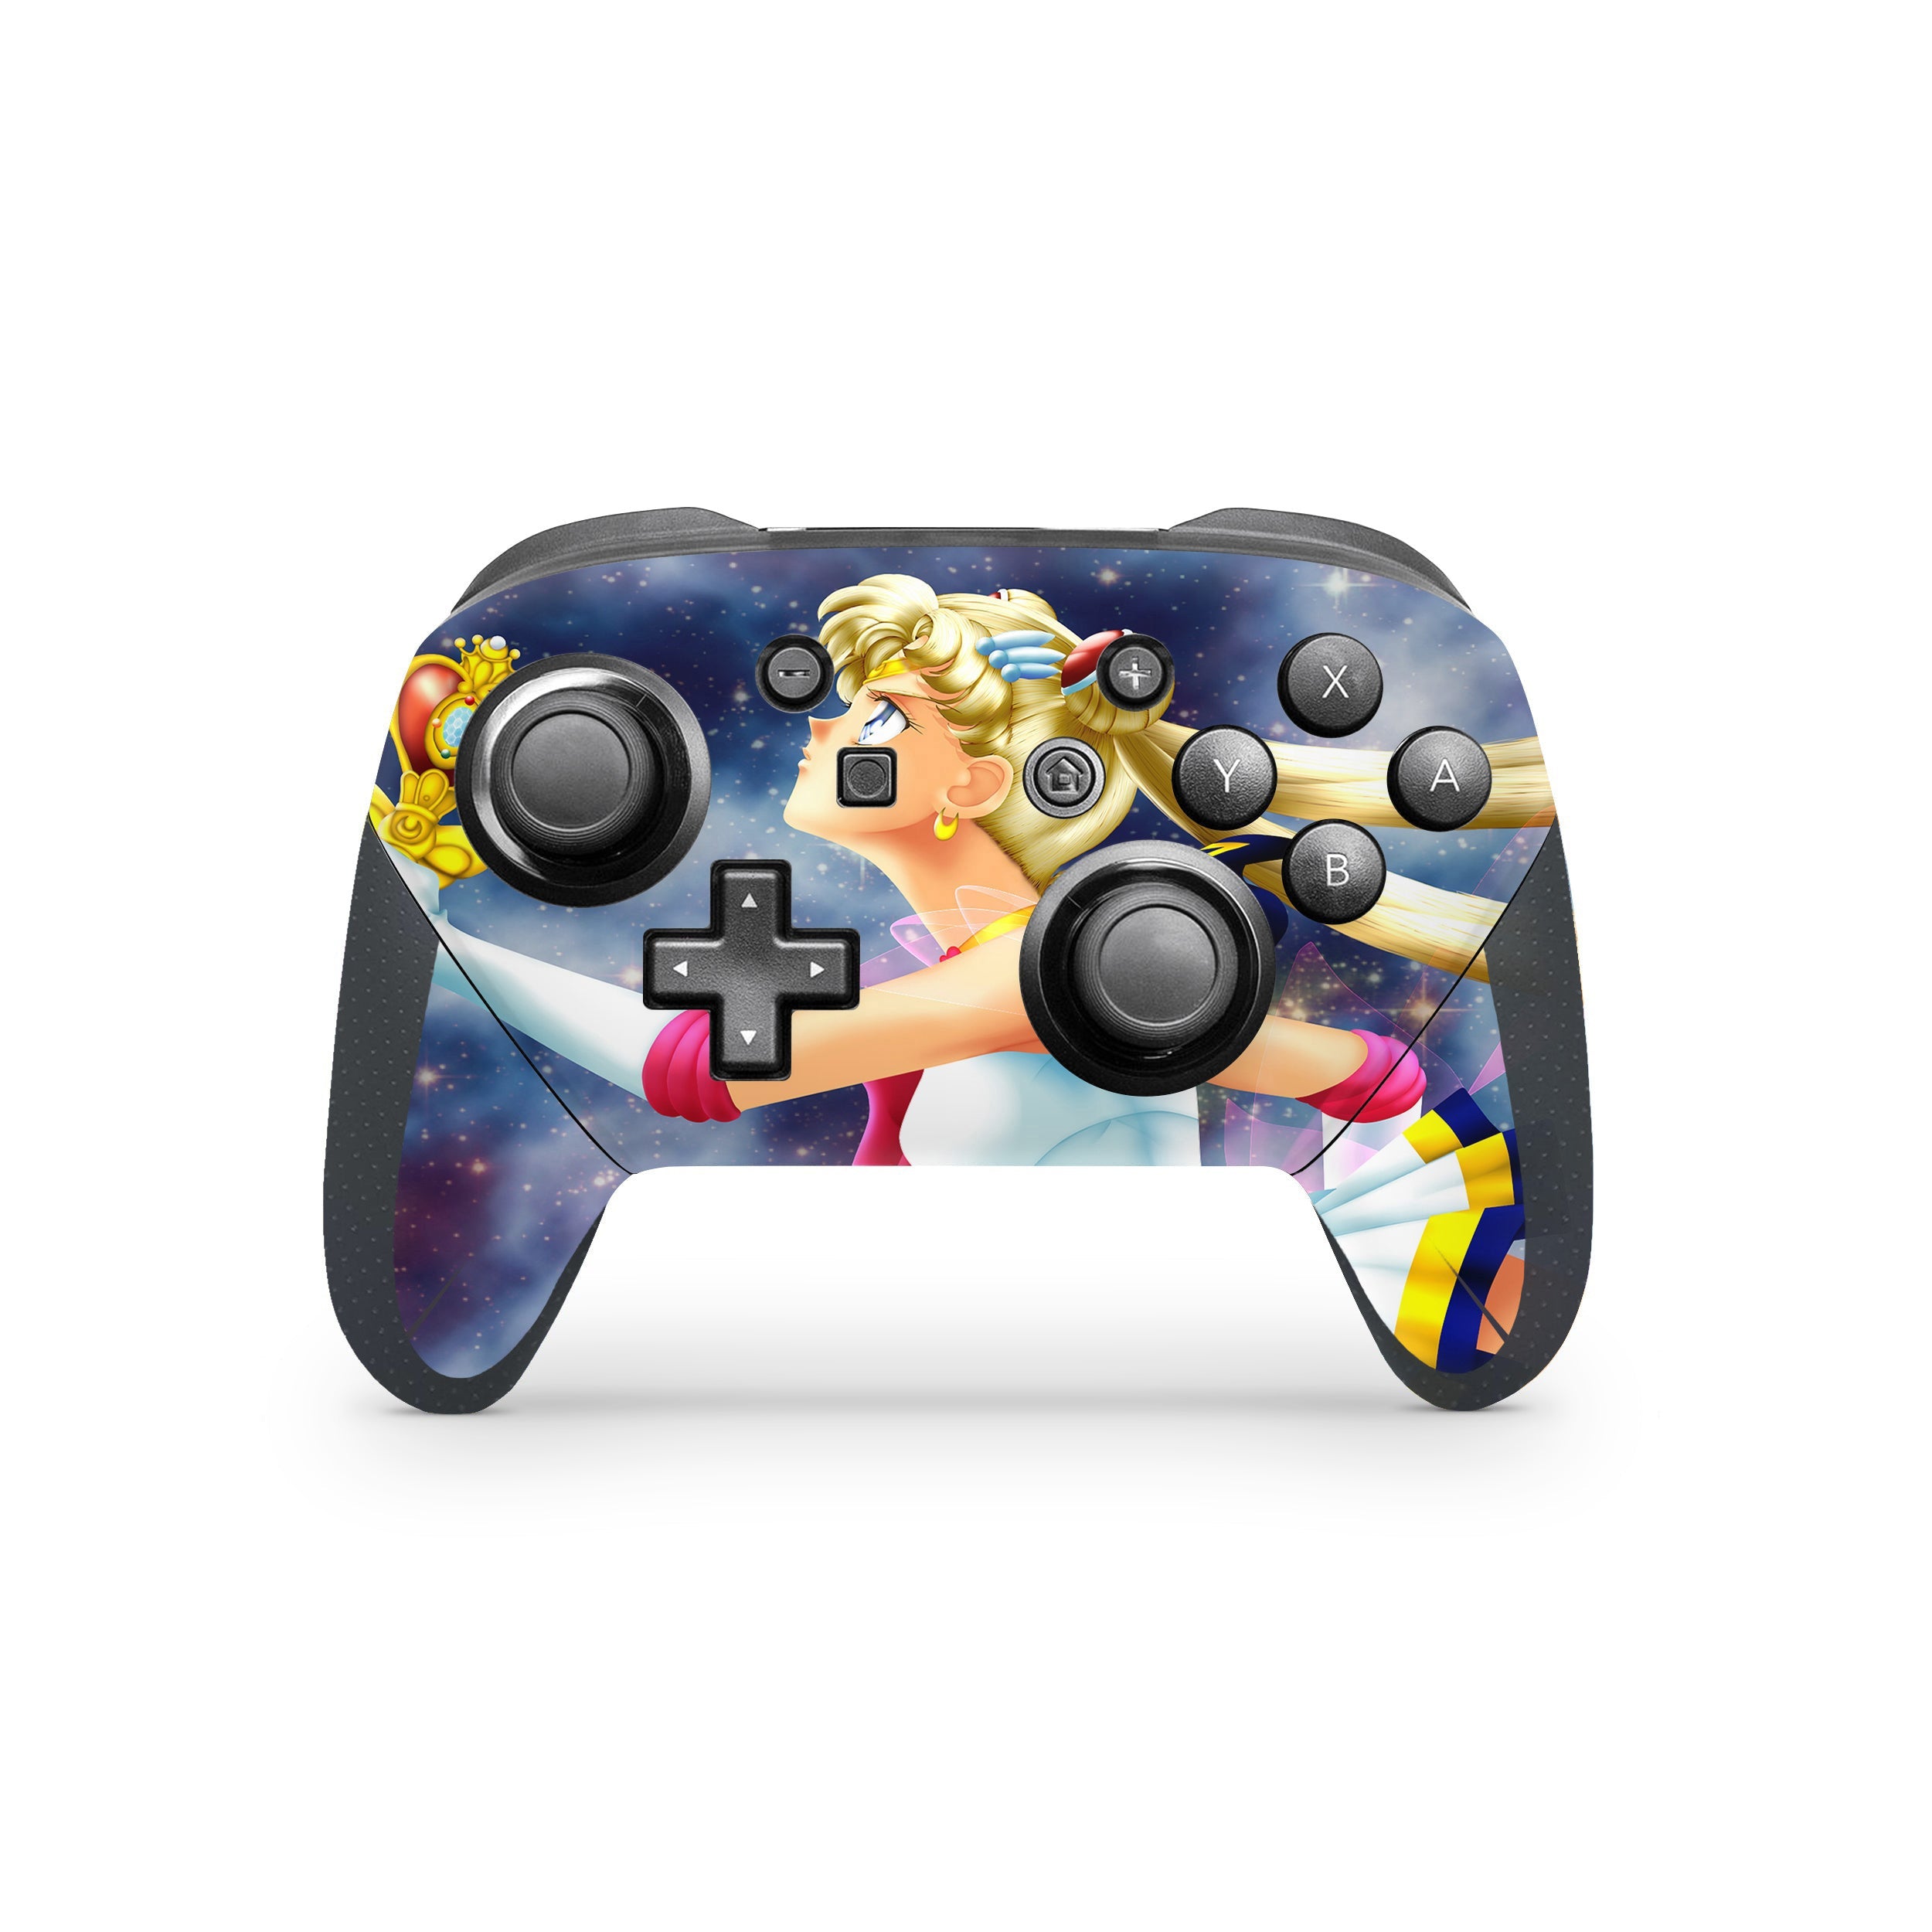 A video game skin featuring a Sailor Moon design for the Switch Pro Controller.